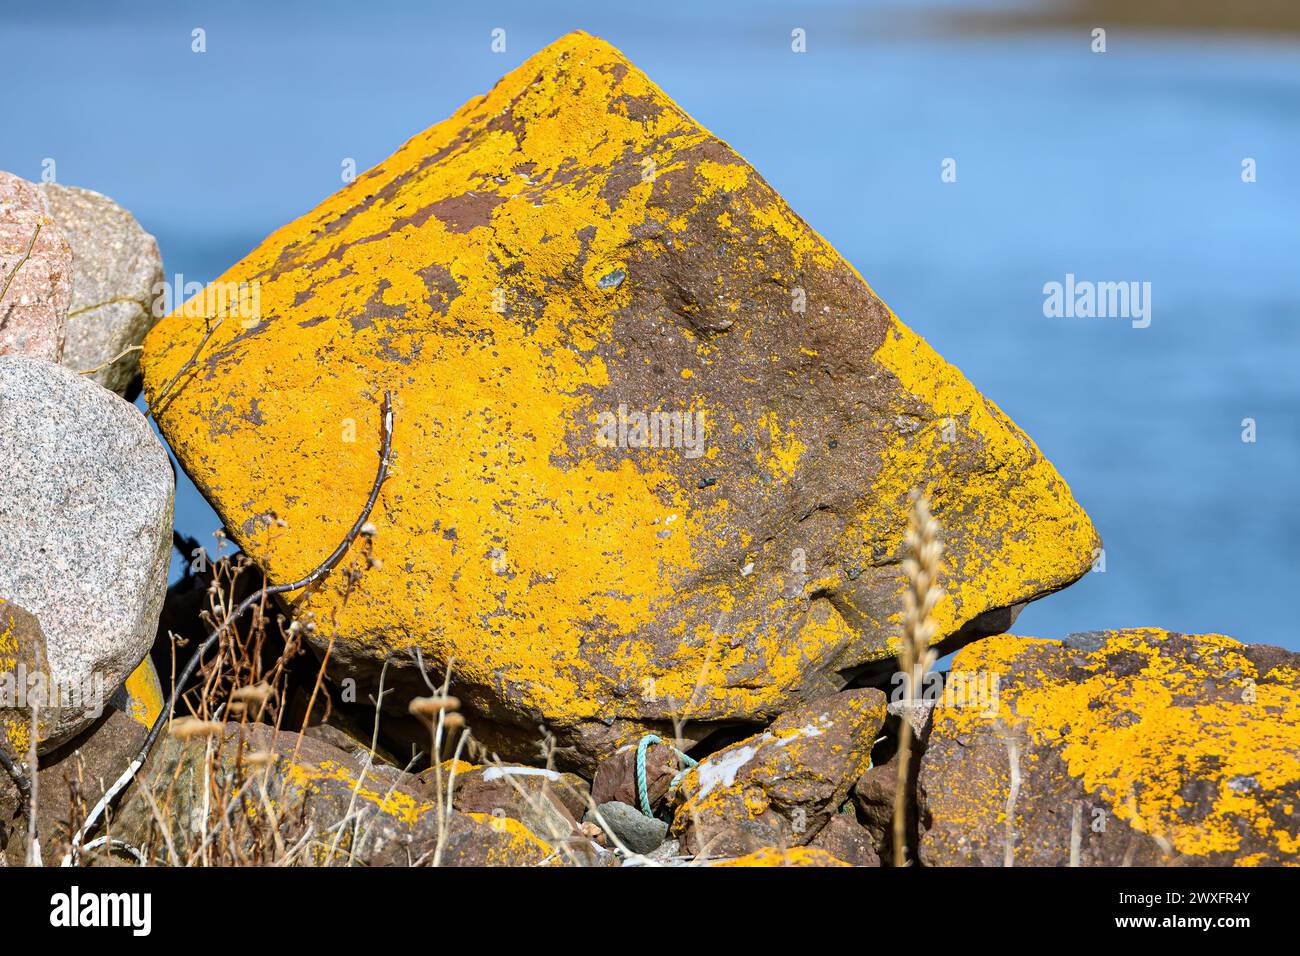 A closeup of a large rock covered with yellow lichen. The lichen covers most of the rock, there is blue water behind. Shallow depth of field. Stock Photo